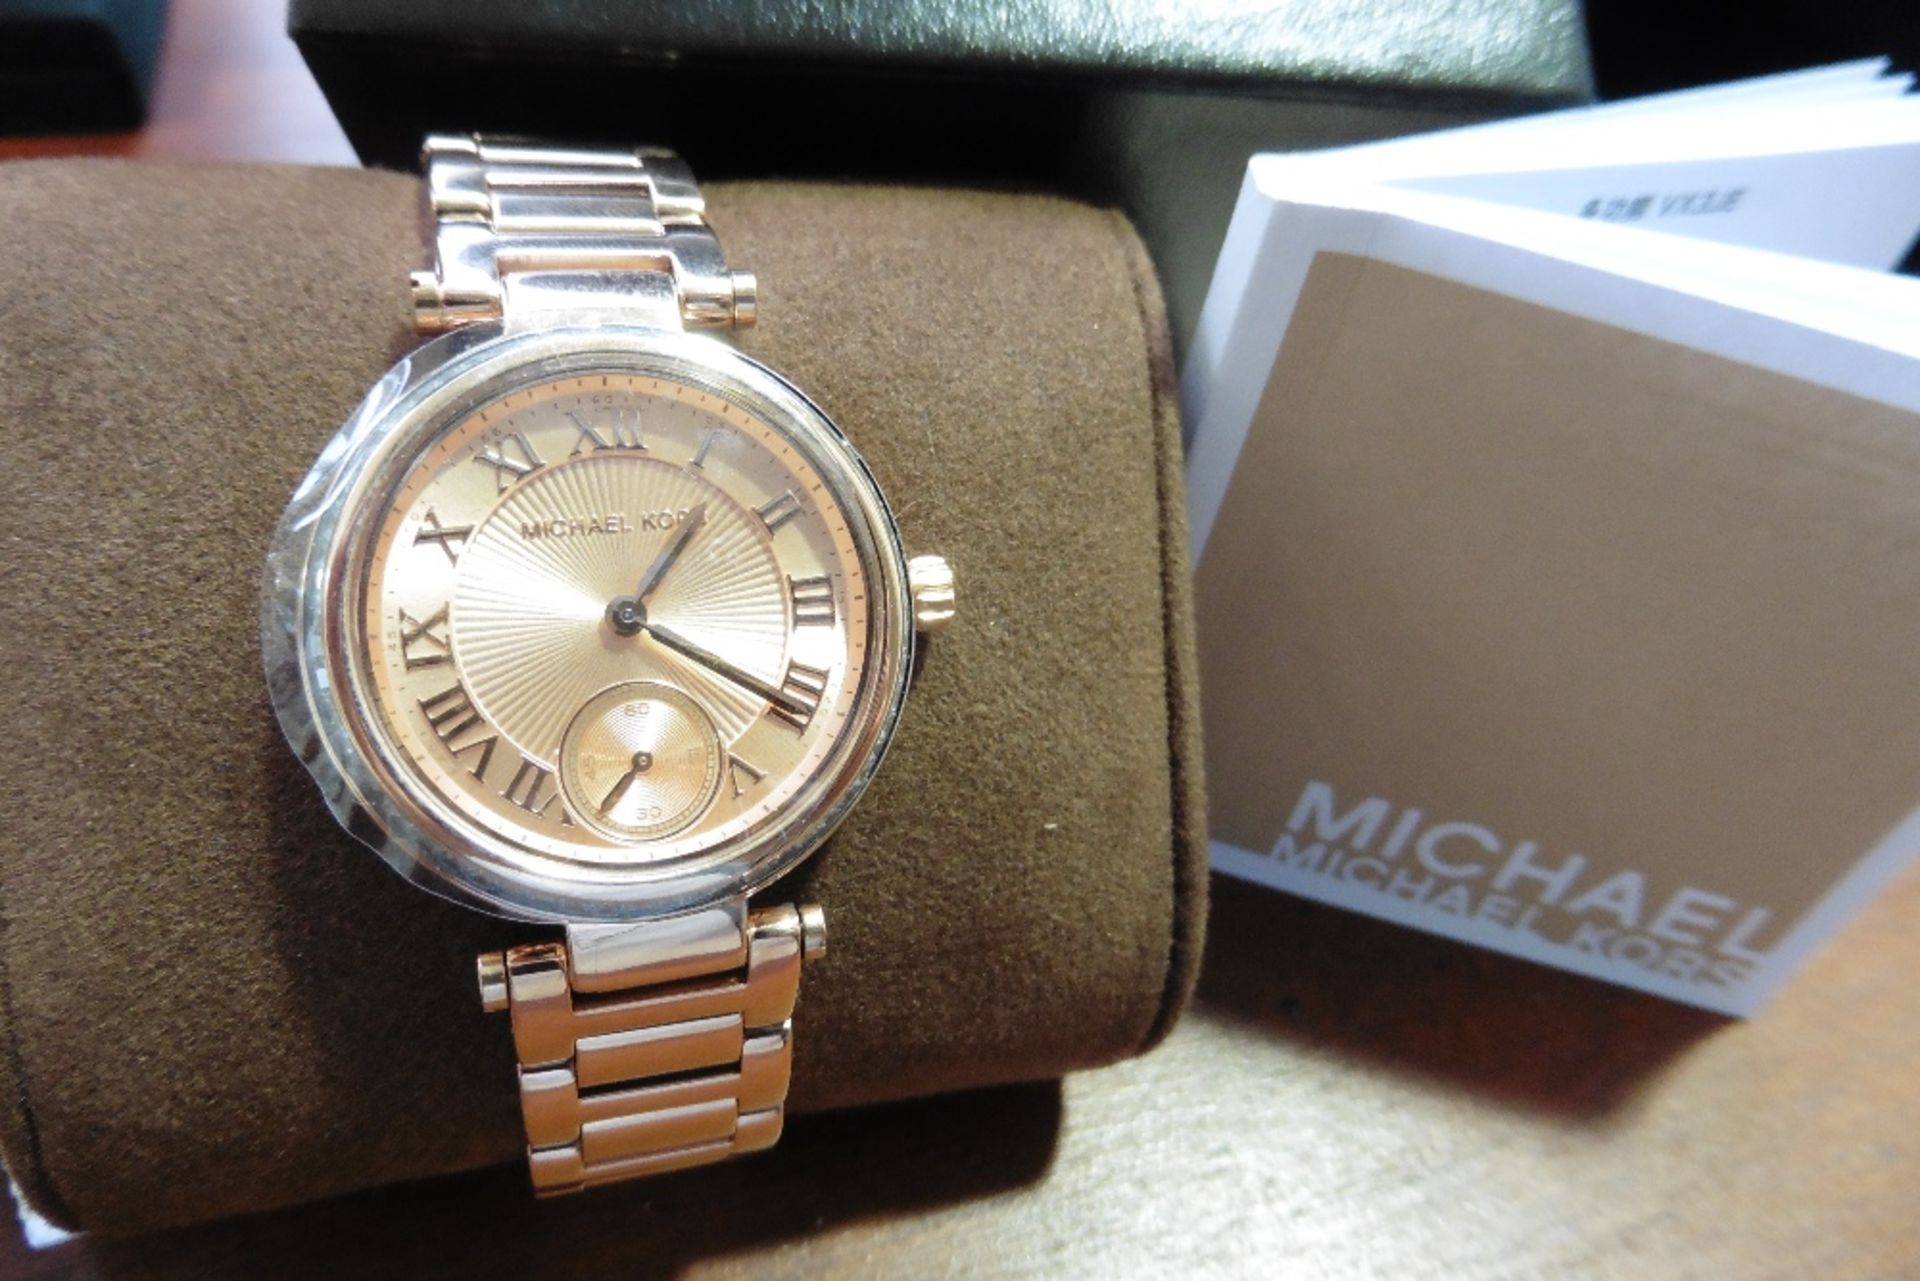 Stylish Michael Kors watch, model number MK5971, stainless steel with rose gold plating and stone